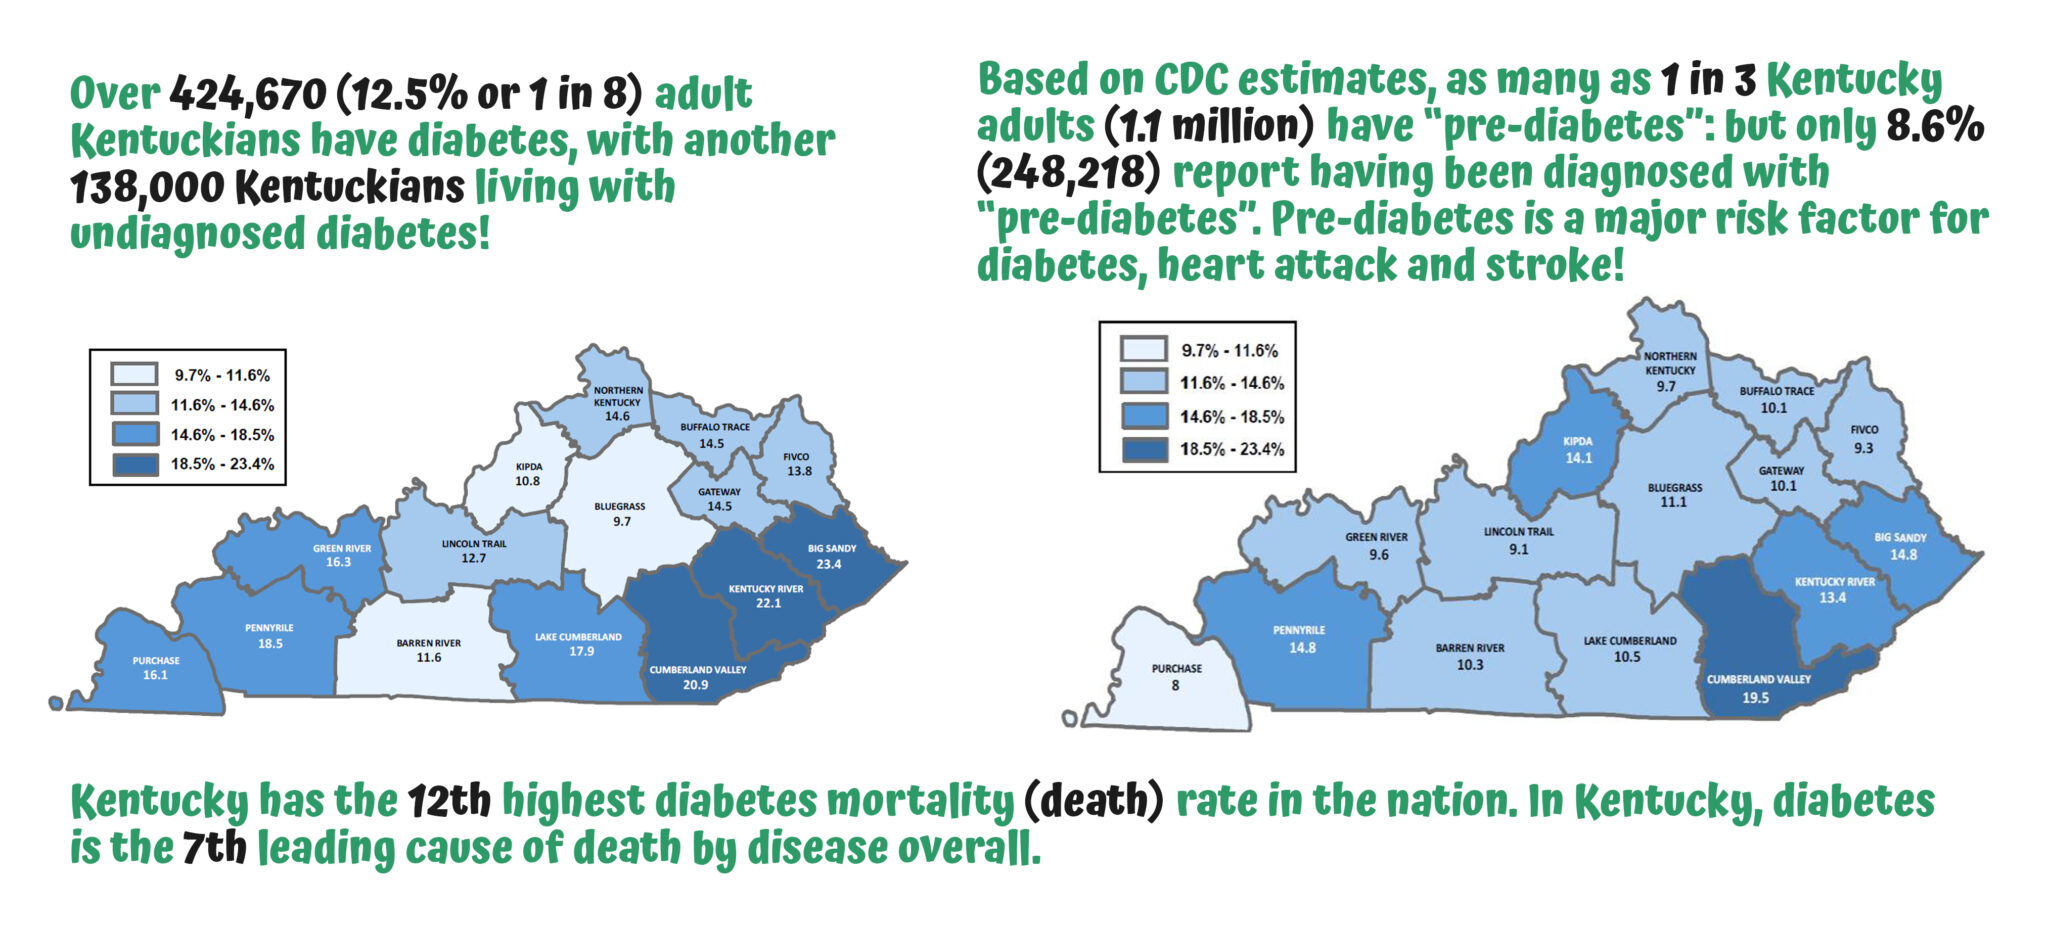 Kentucky has the 12th highest diabetes mortality rate in the nation. In Kentucky, diabetes is the 7th leading cause of death by disease overall.